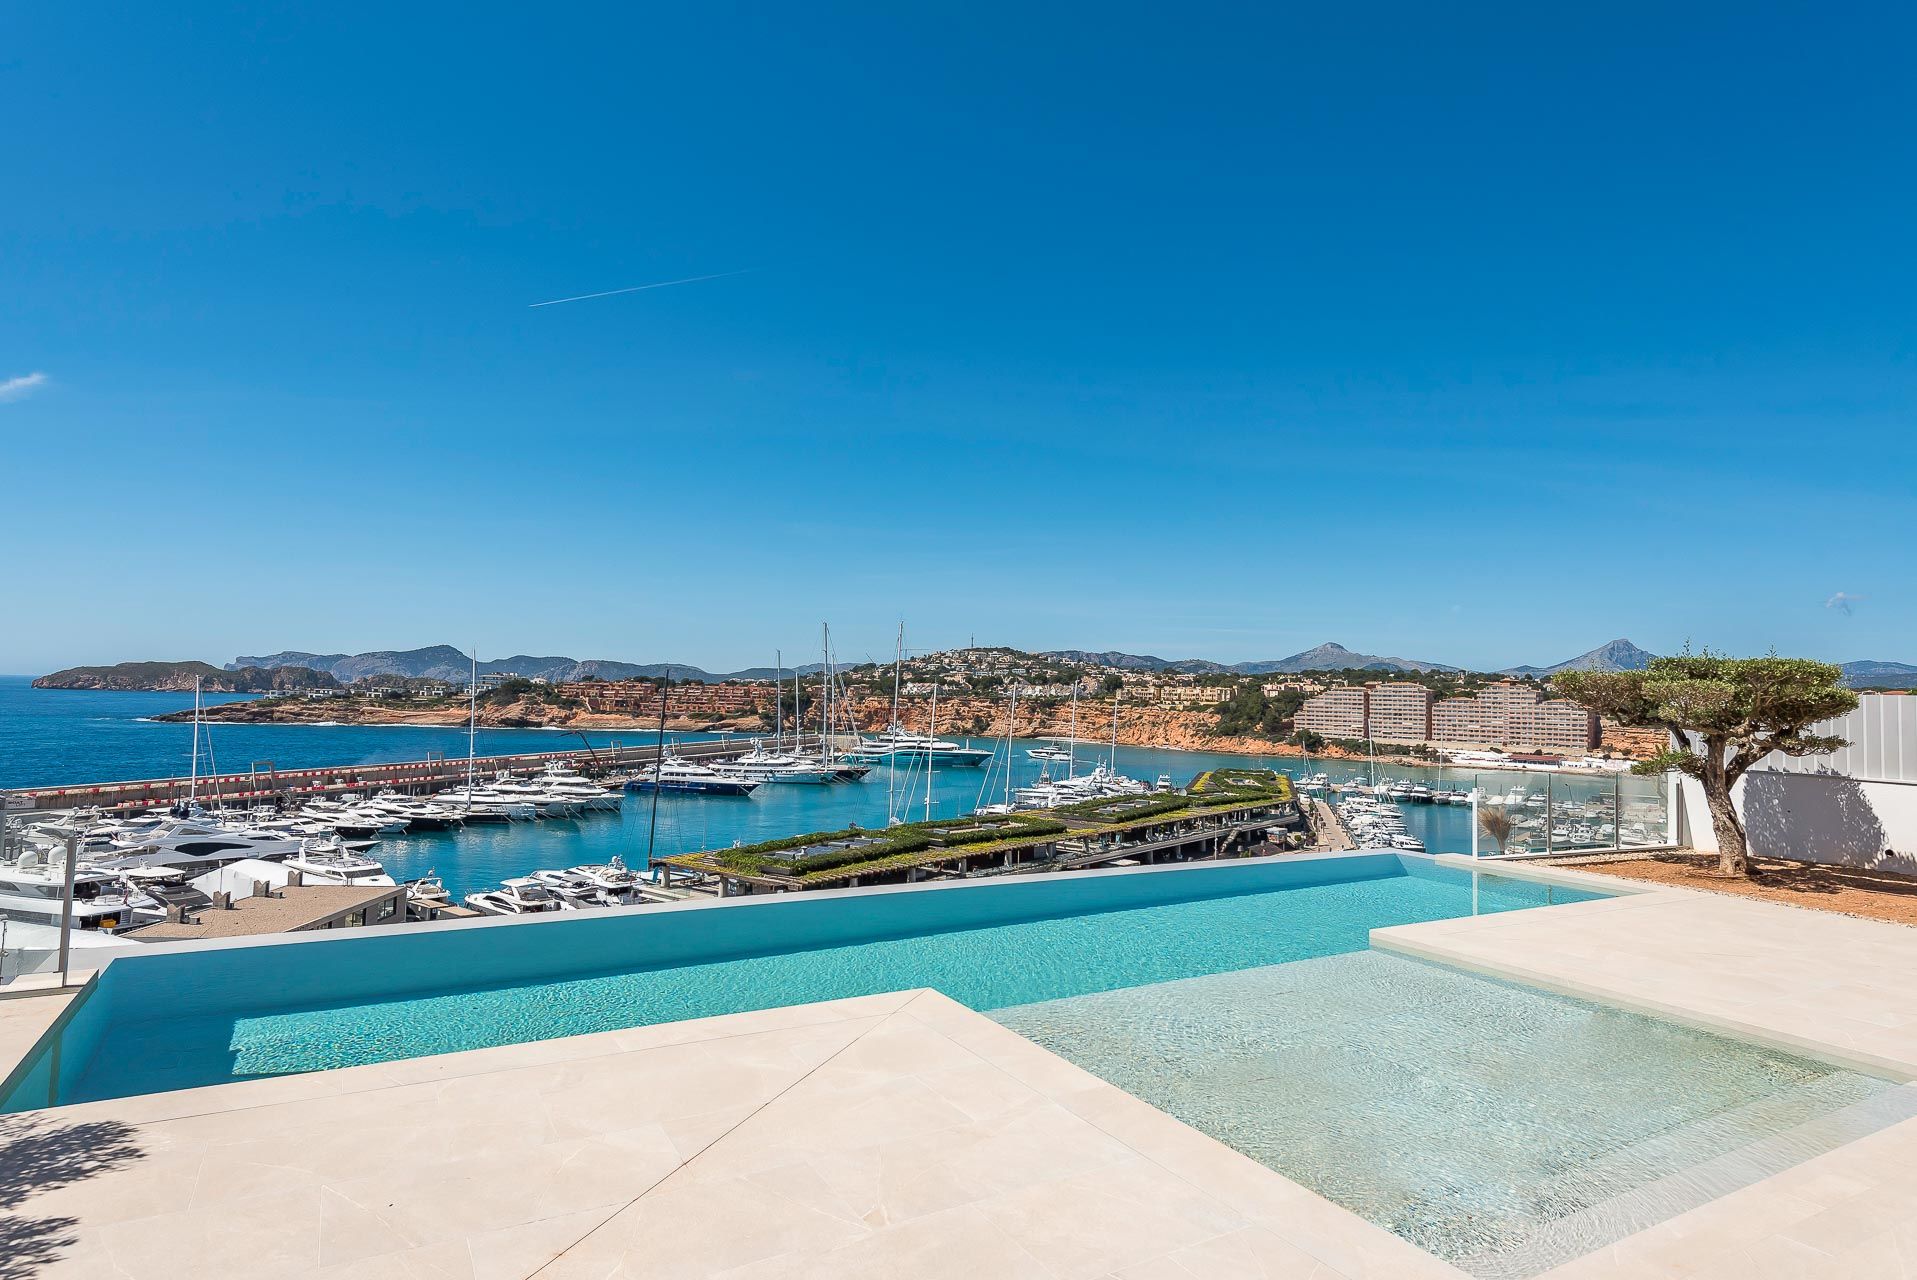 Infinity pool with sun terrace and views of Port Adriano